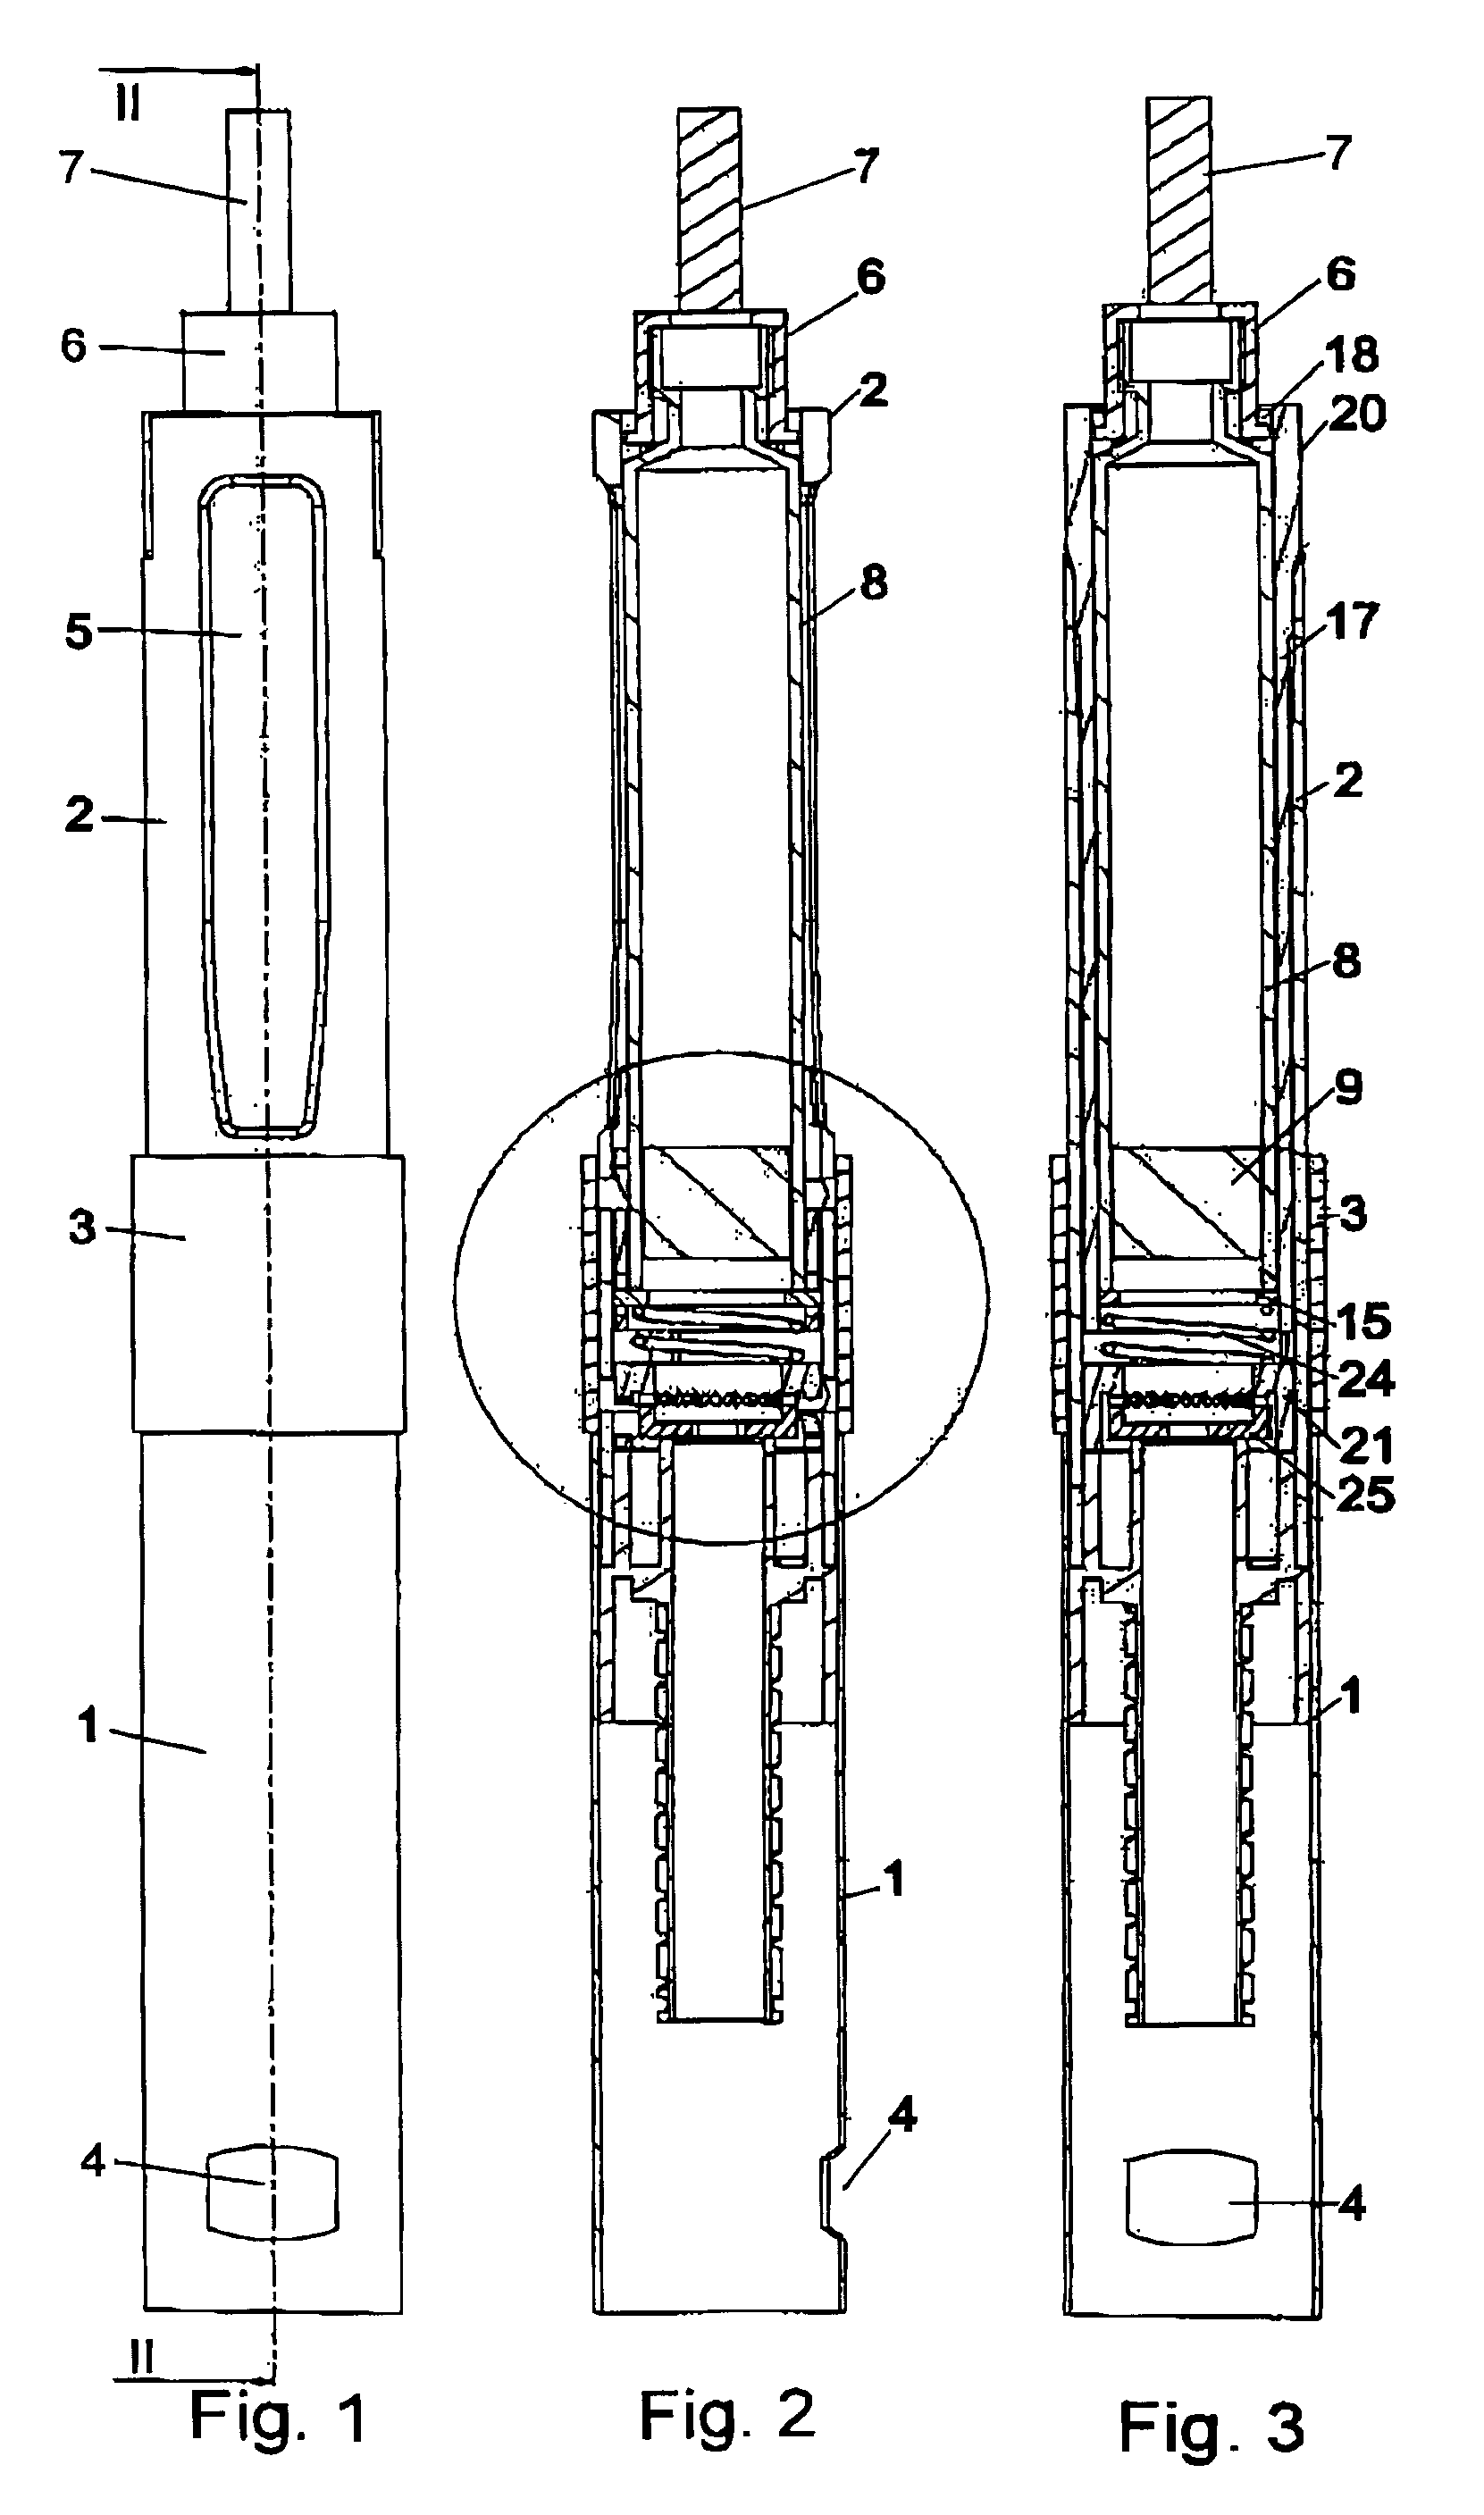 Frontloaded injection device